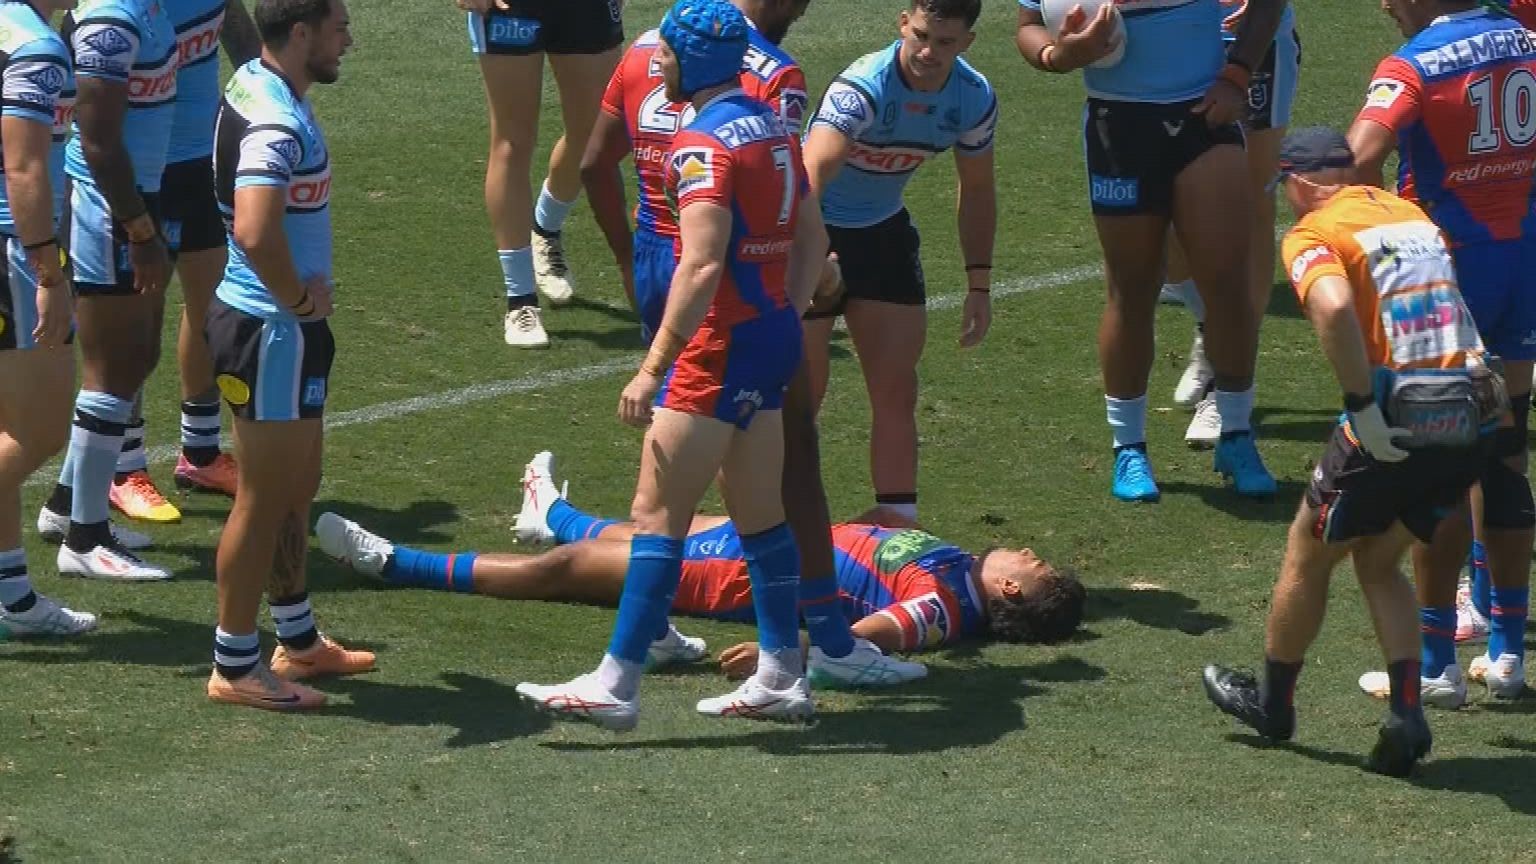 Newcastle's Krystian Mapapalangi knocked out in sickening collision as Knights defeat Sharks